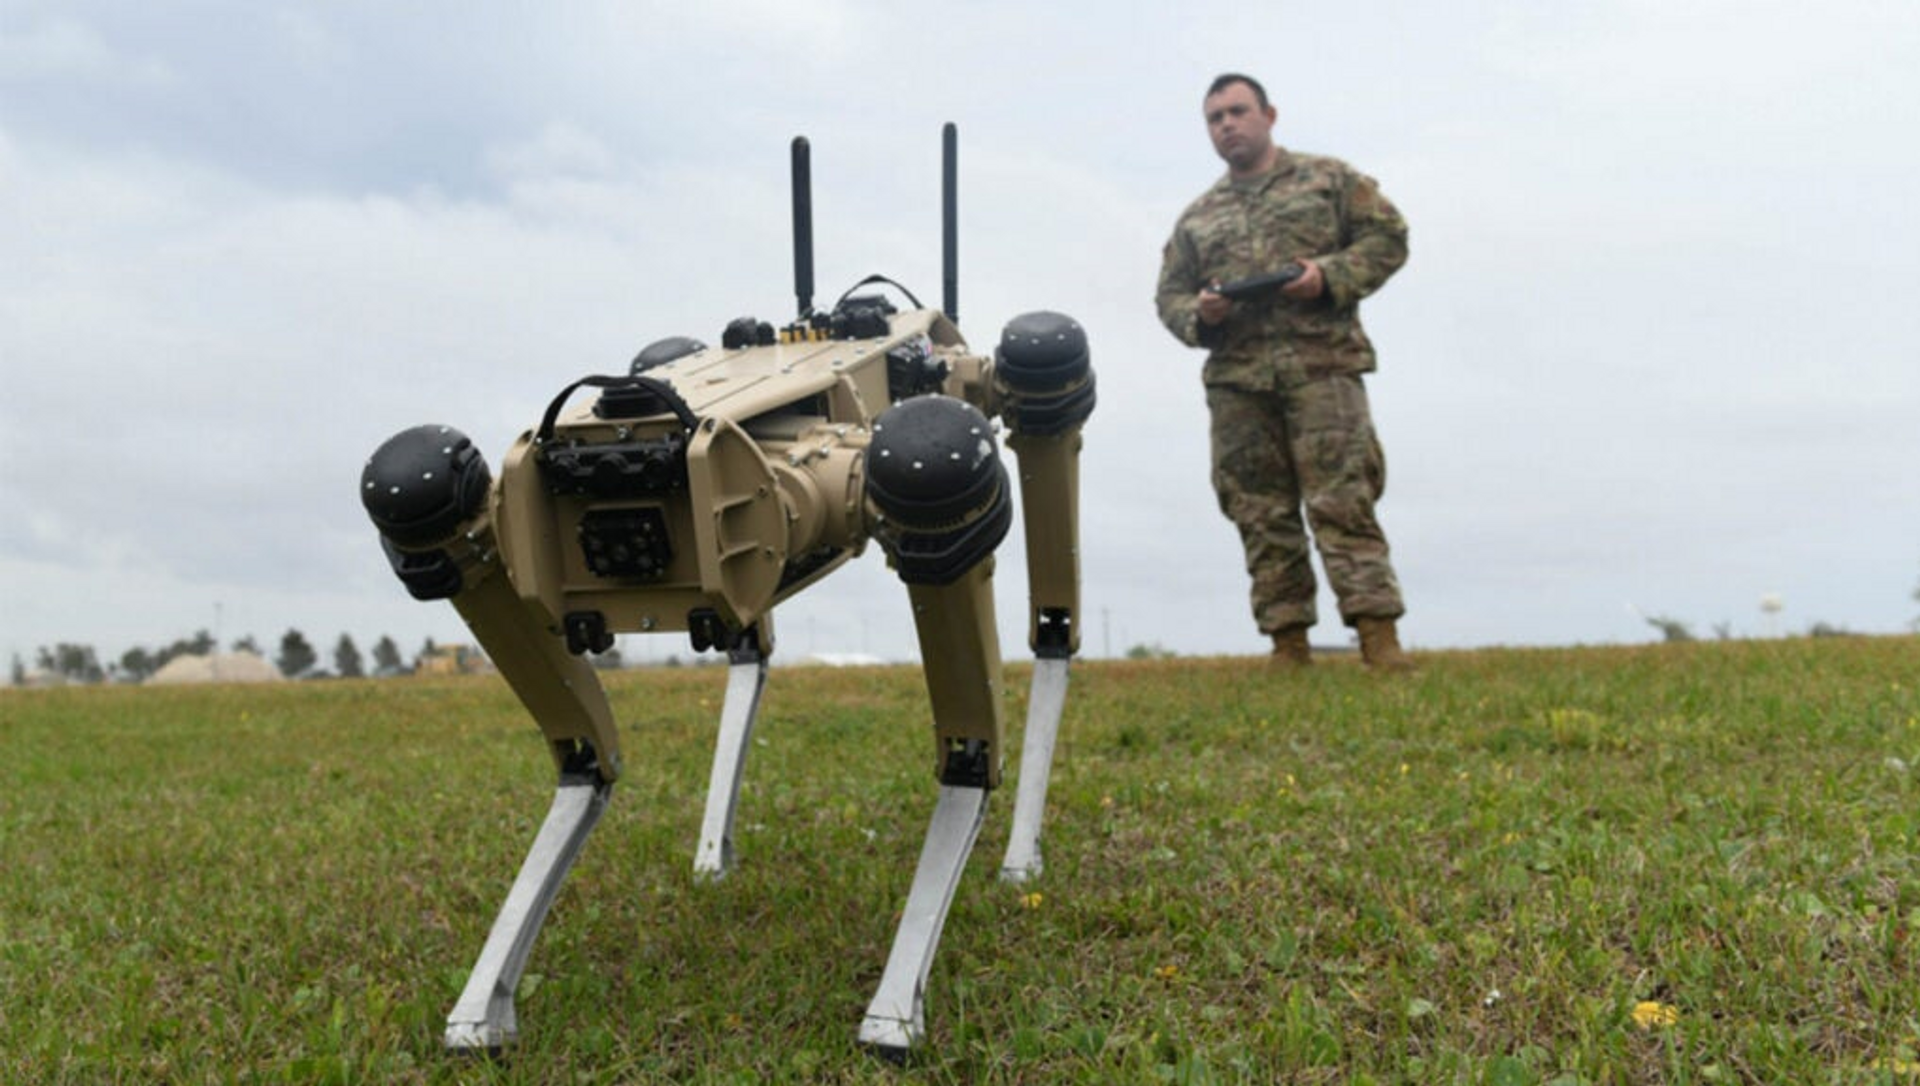 U.S. Air Force Master Sgt. Krystoffer Miller, 325th Security Forces Squadron operations support superintendent, operates a Quad-legged Unmanned Ground Vehicle at Tyndall Air Force Base, Florida, March 24, 2021.  - Sputnik International, 1920, 30.03.2021